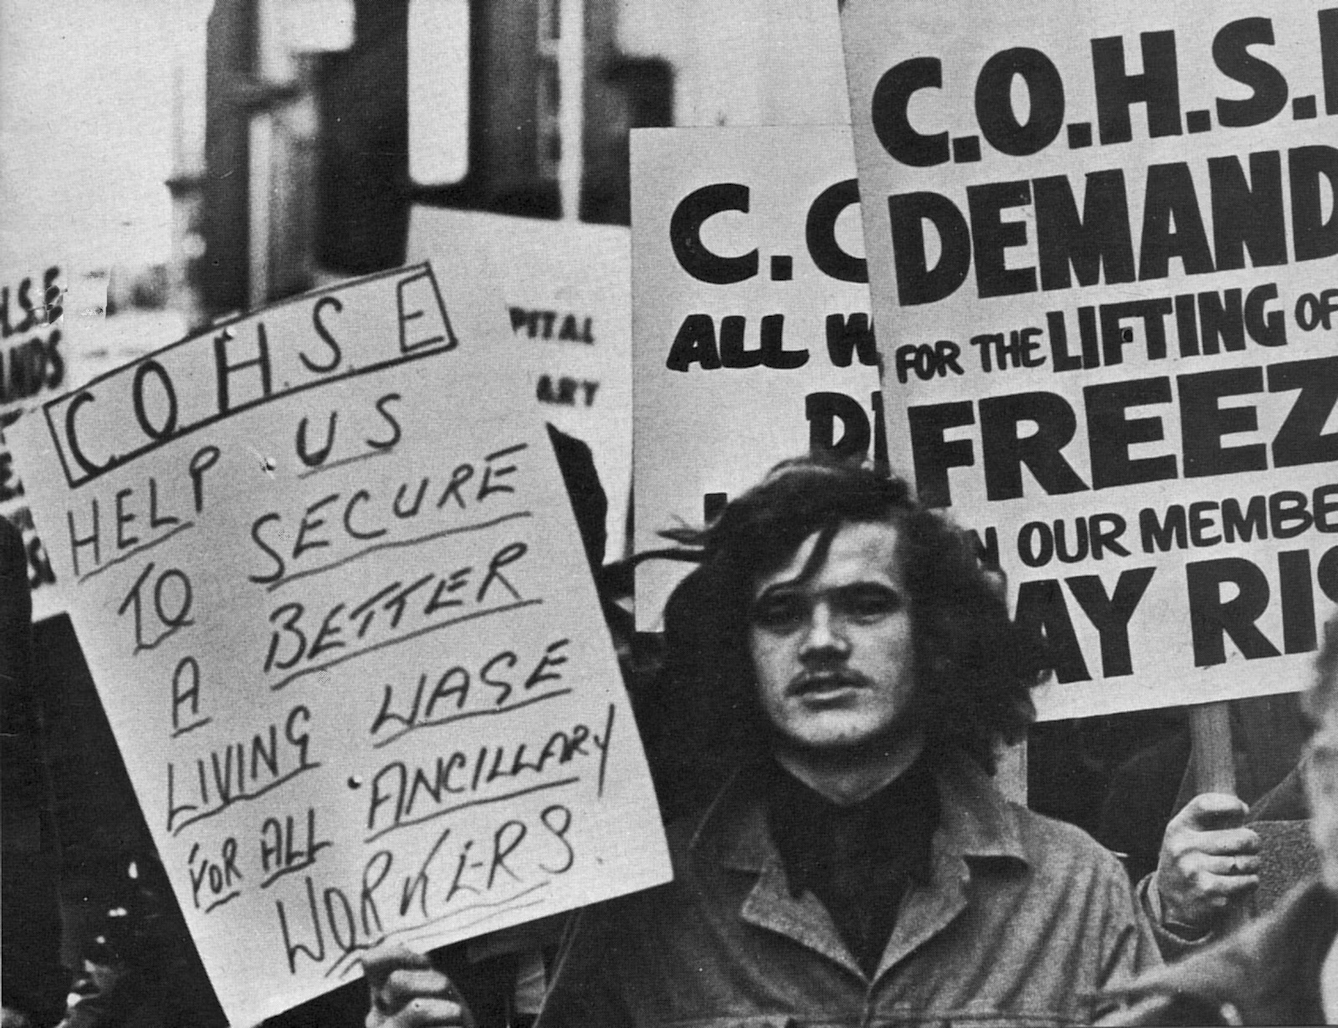 Black and white photograph of a protest with banners reading "COHSE help us to secure a better living wage for all ancillary workers" and "COHSE demand for the lifting of freeze on our members' pay rise"